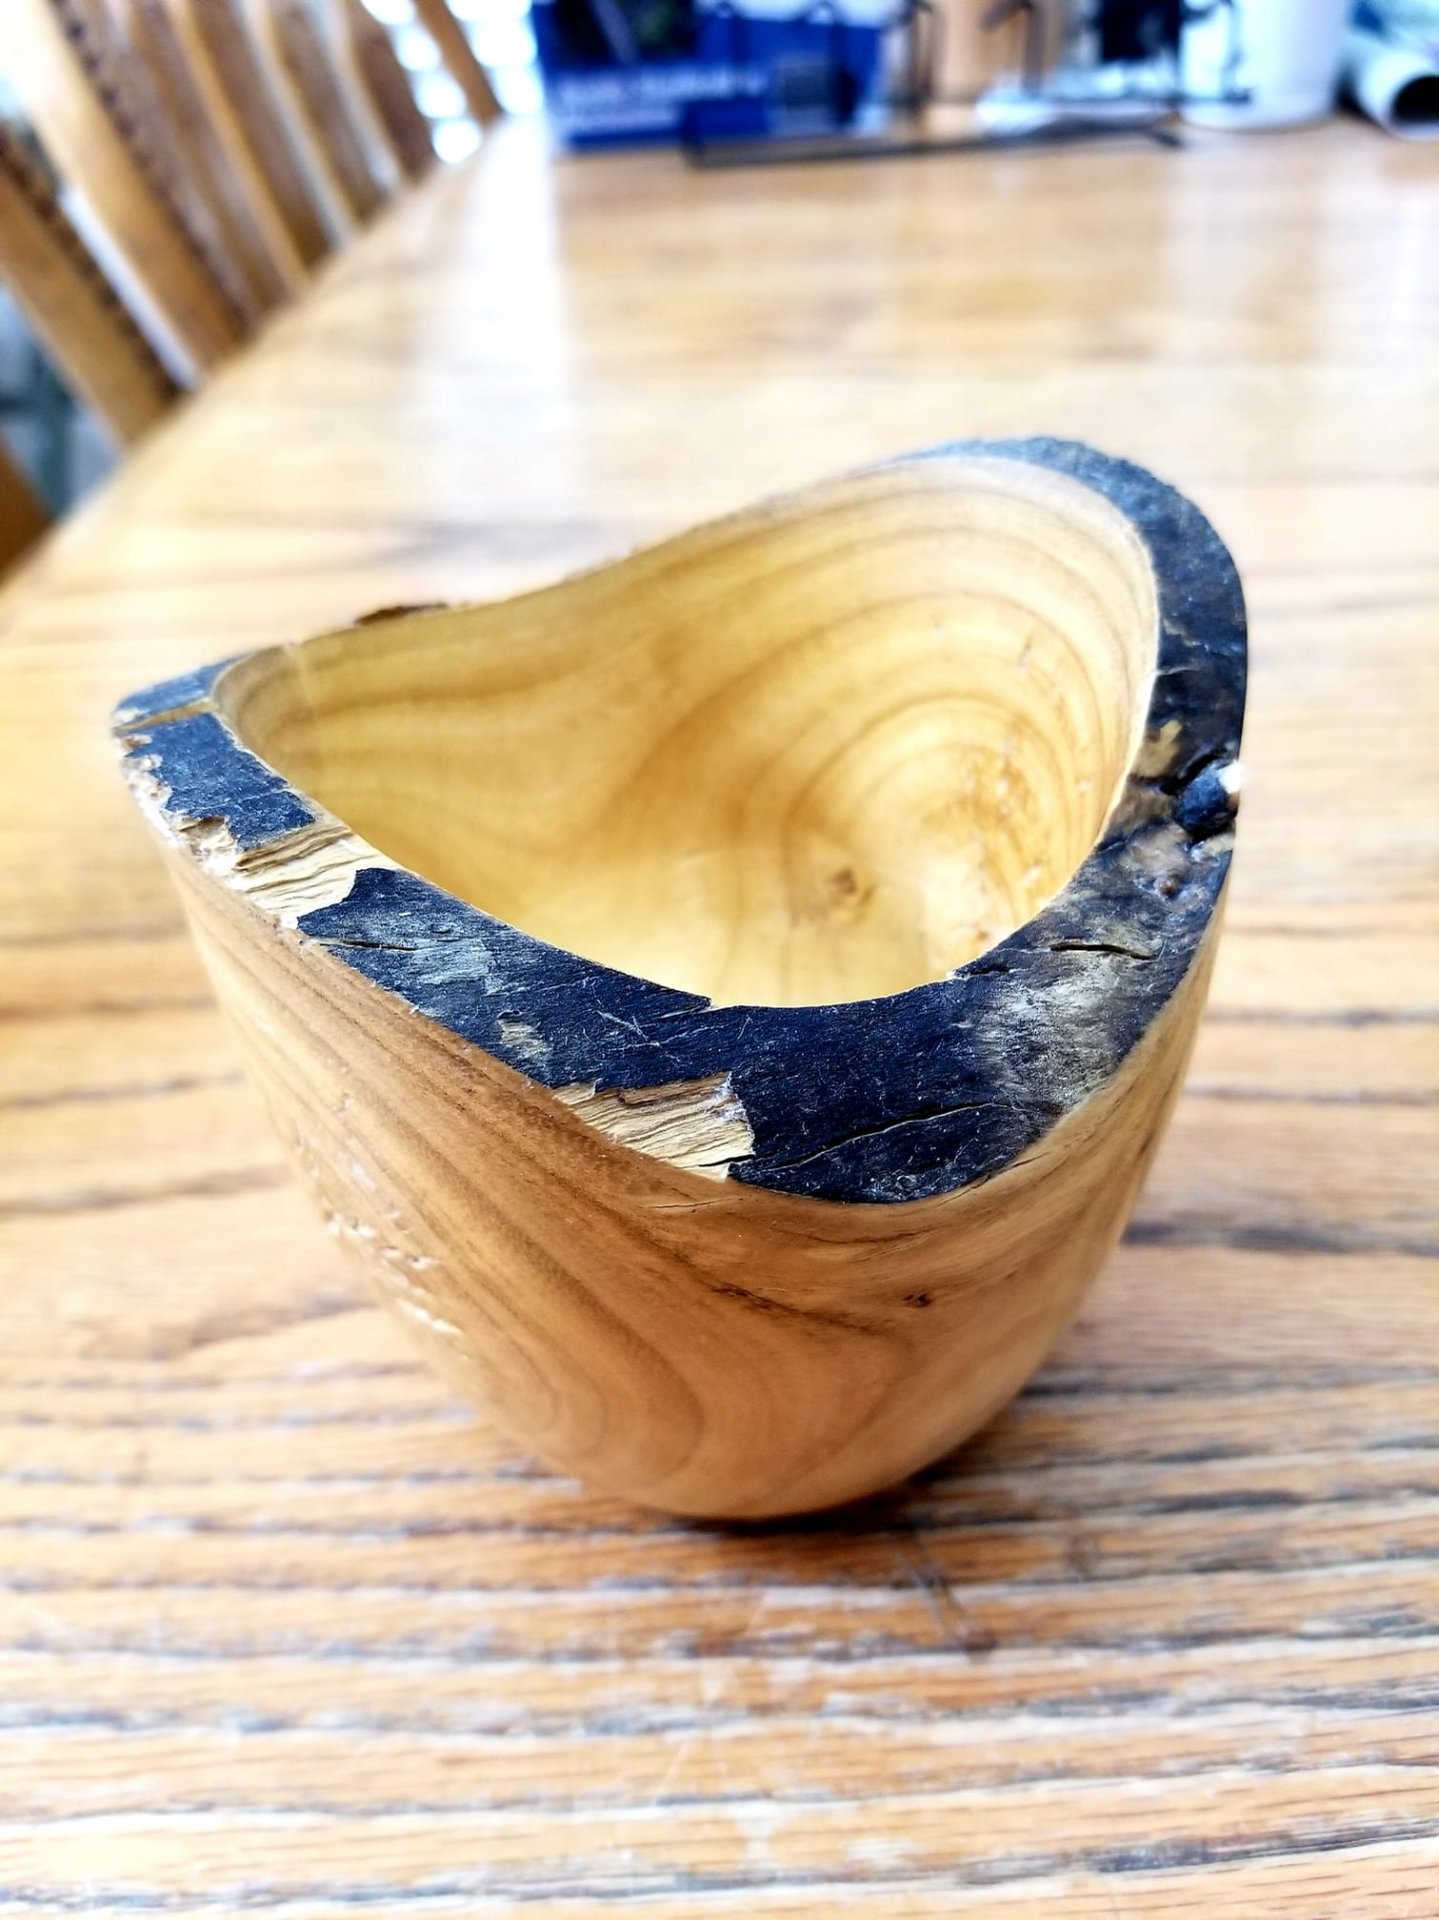 My first live edge